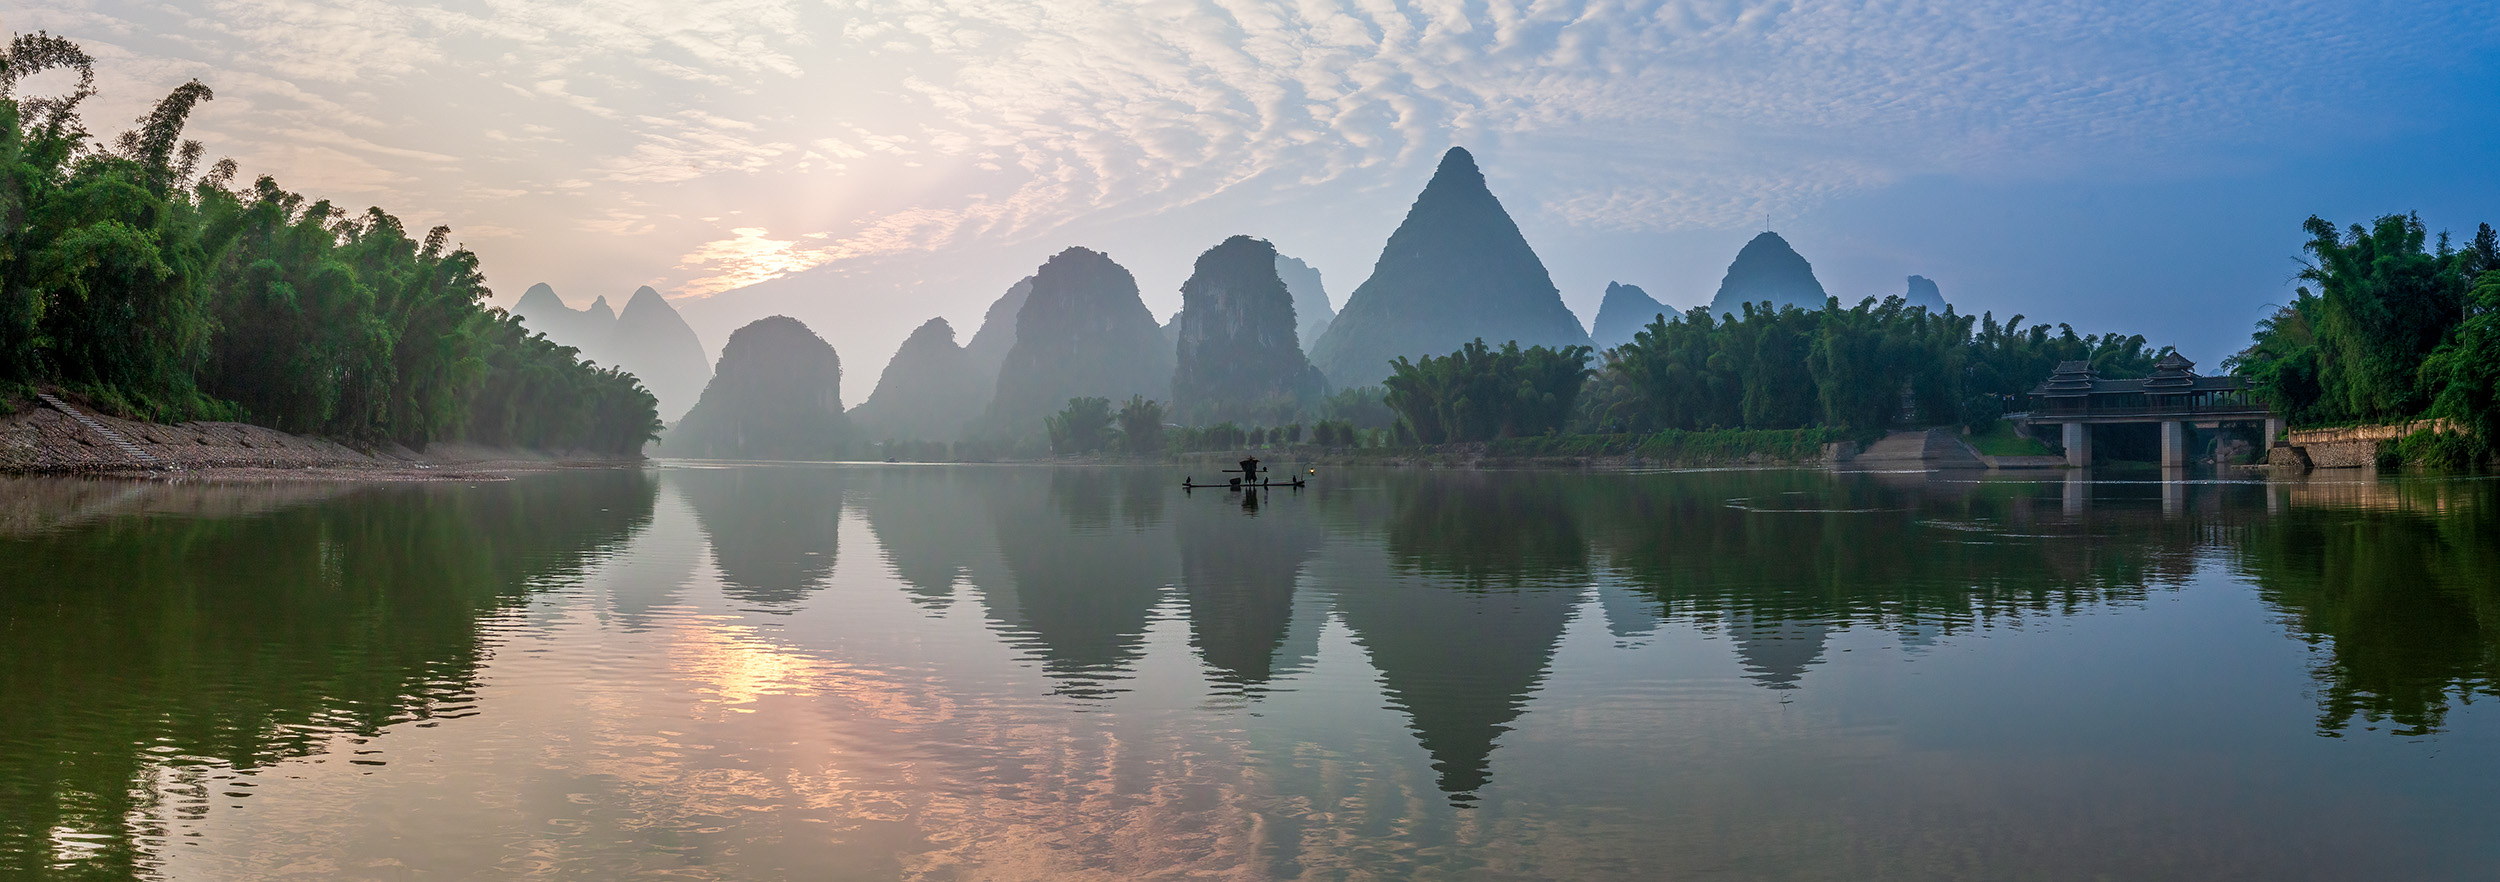 I woke up at 4AM with my guide Lilly and our driver to head over to the Li River to head out on the water to capture an image...